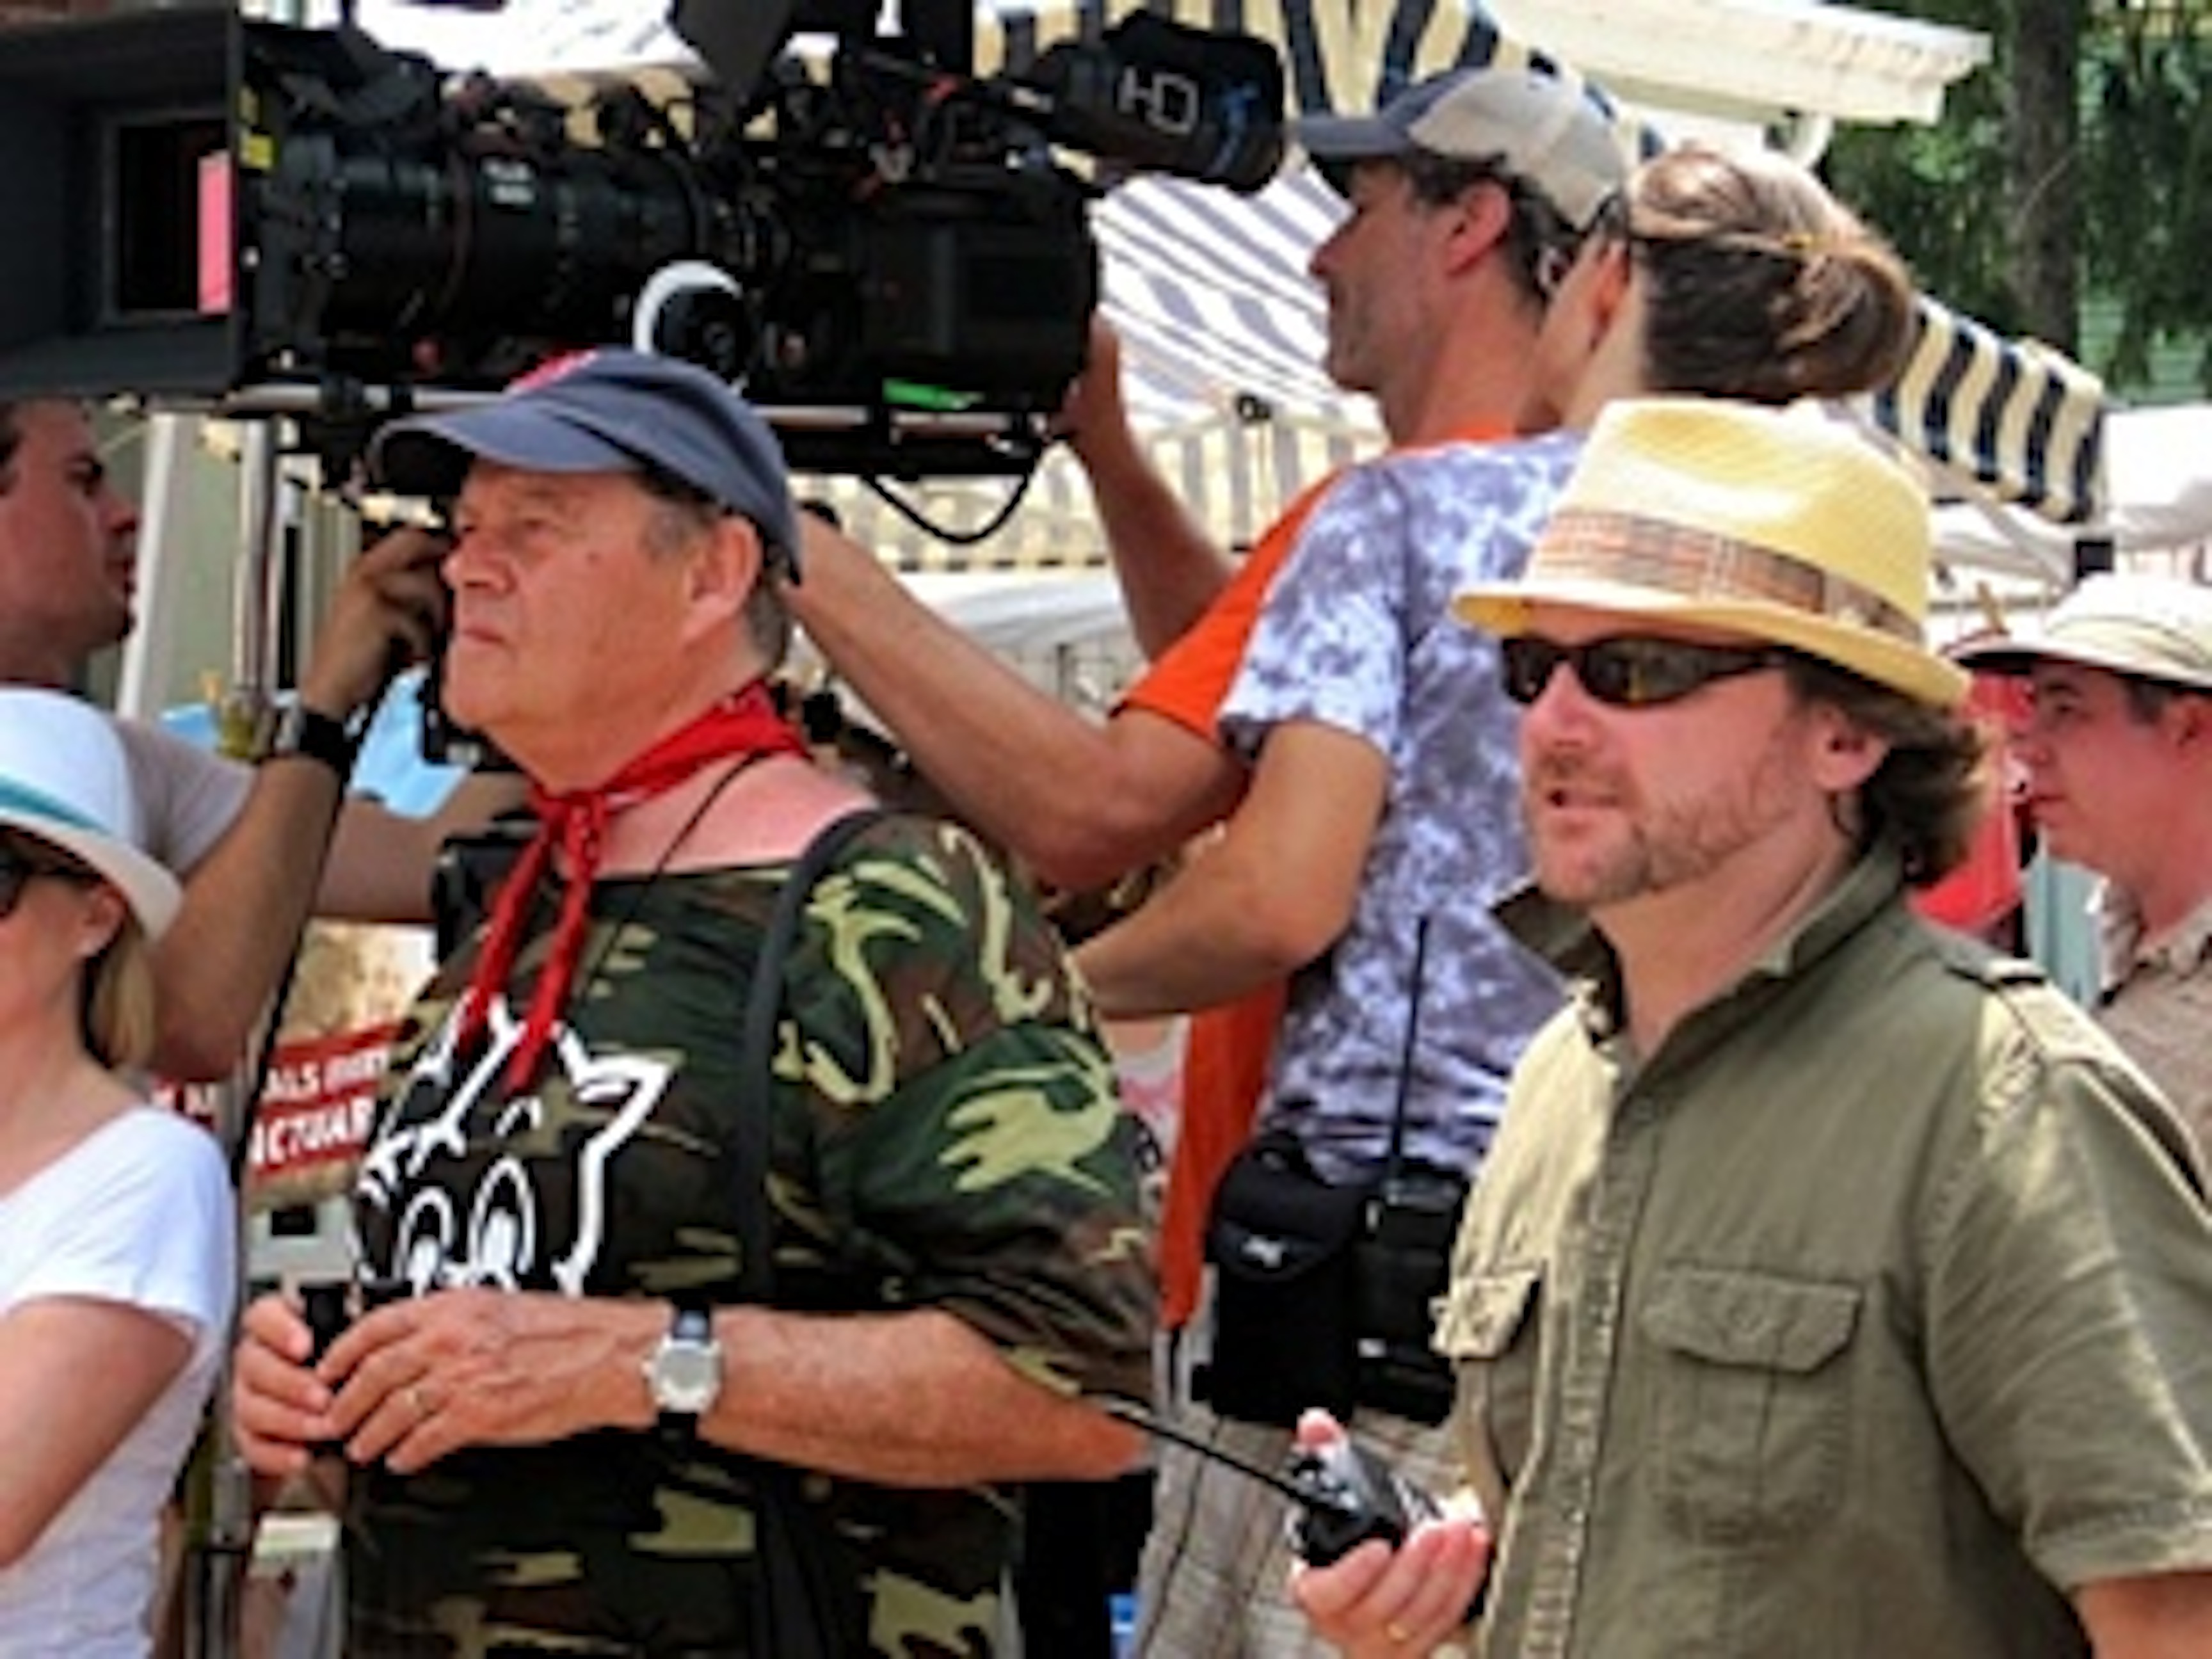 With Director Bruce Beresford